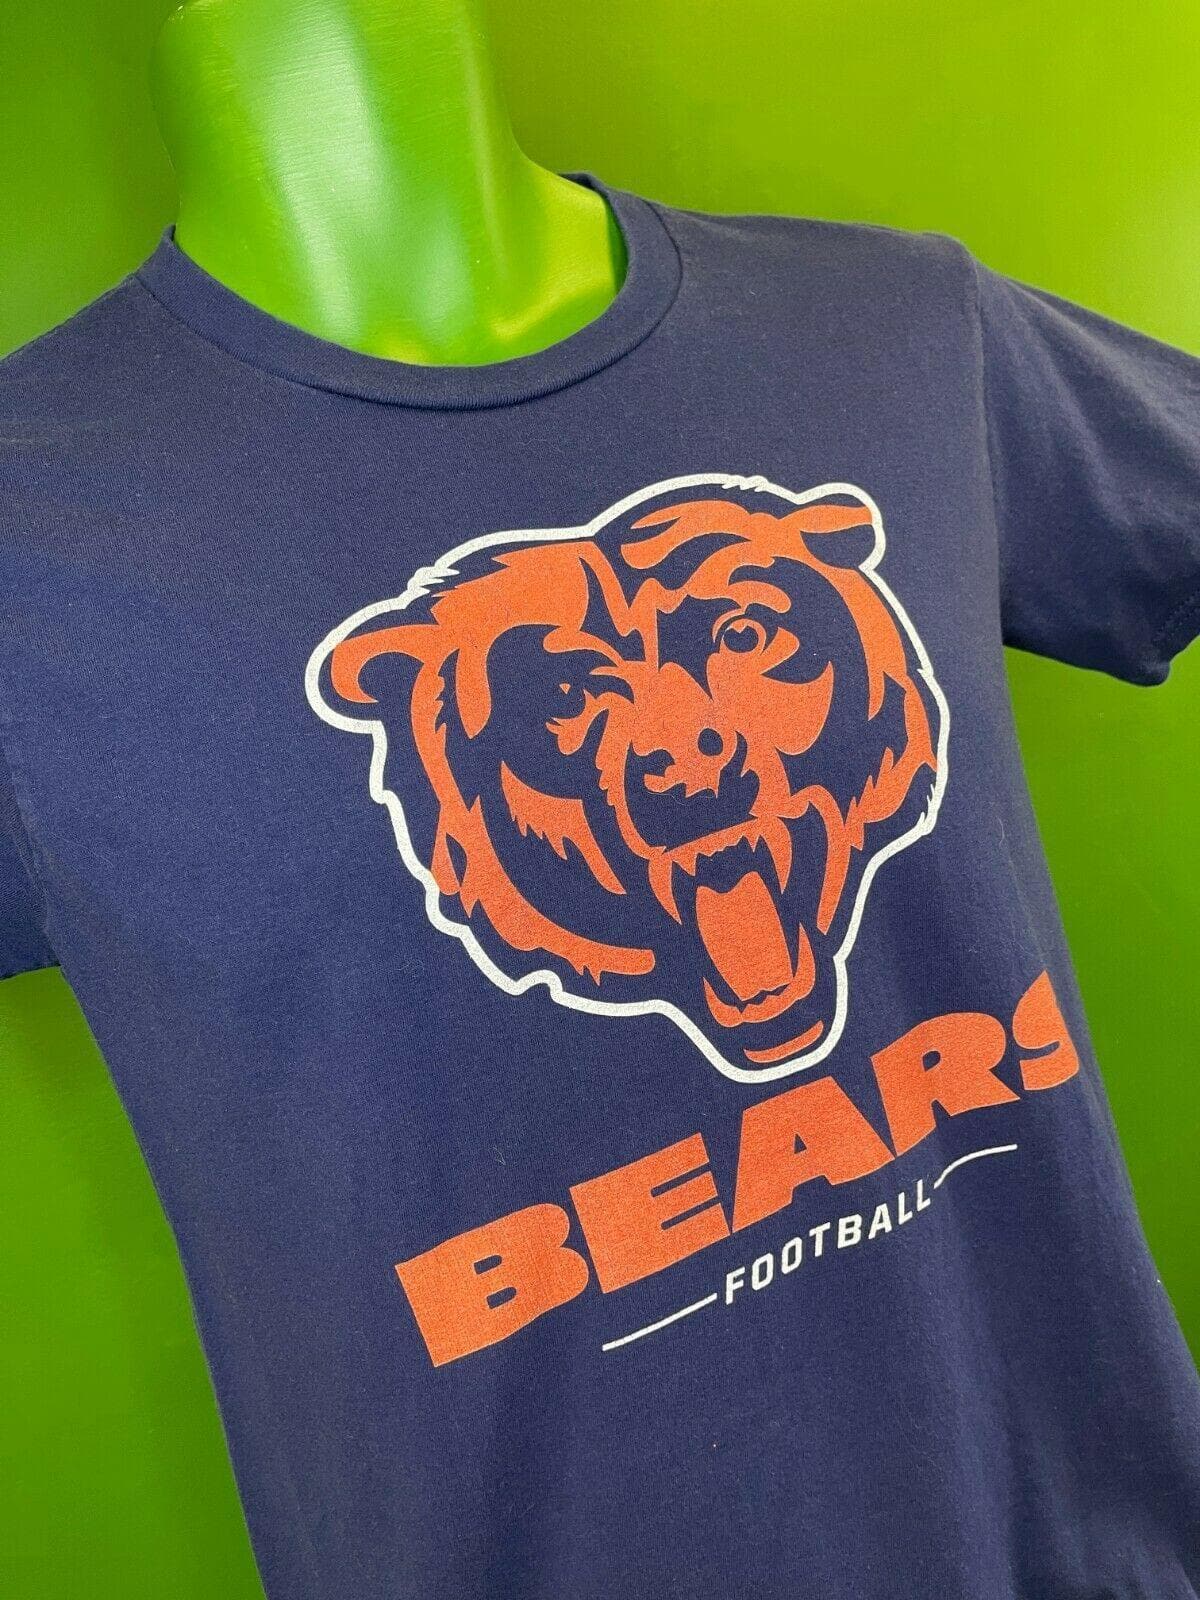 NFL Chicago Bears Pro Line Cotton T-Shirt Youth Large 14-16